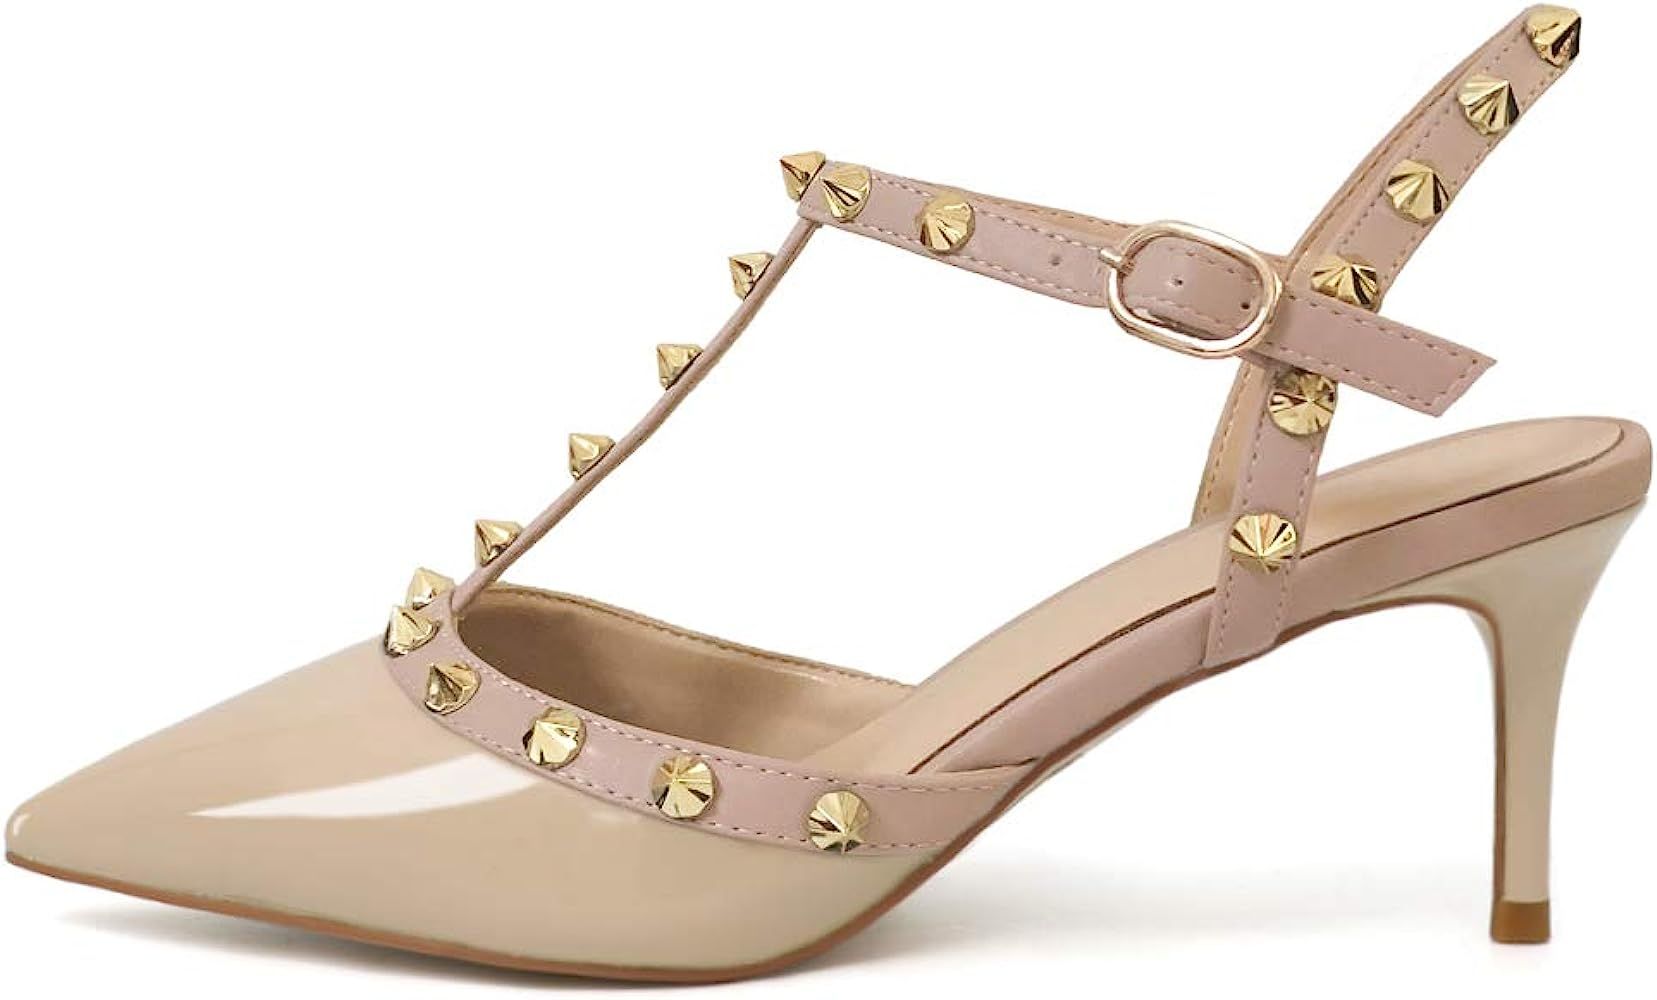 Studded Sandals for Women Kitten Heels Slingback Pumps Pointed Toe Sandals | Amazon (US)